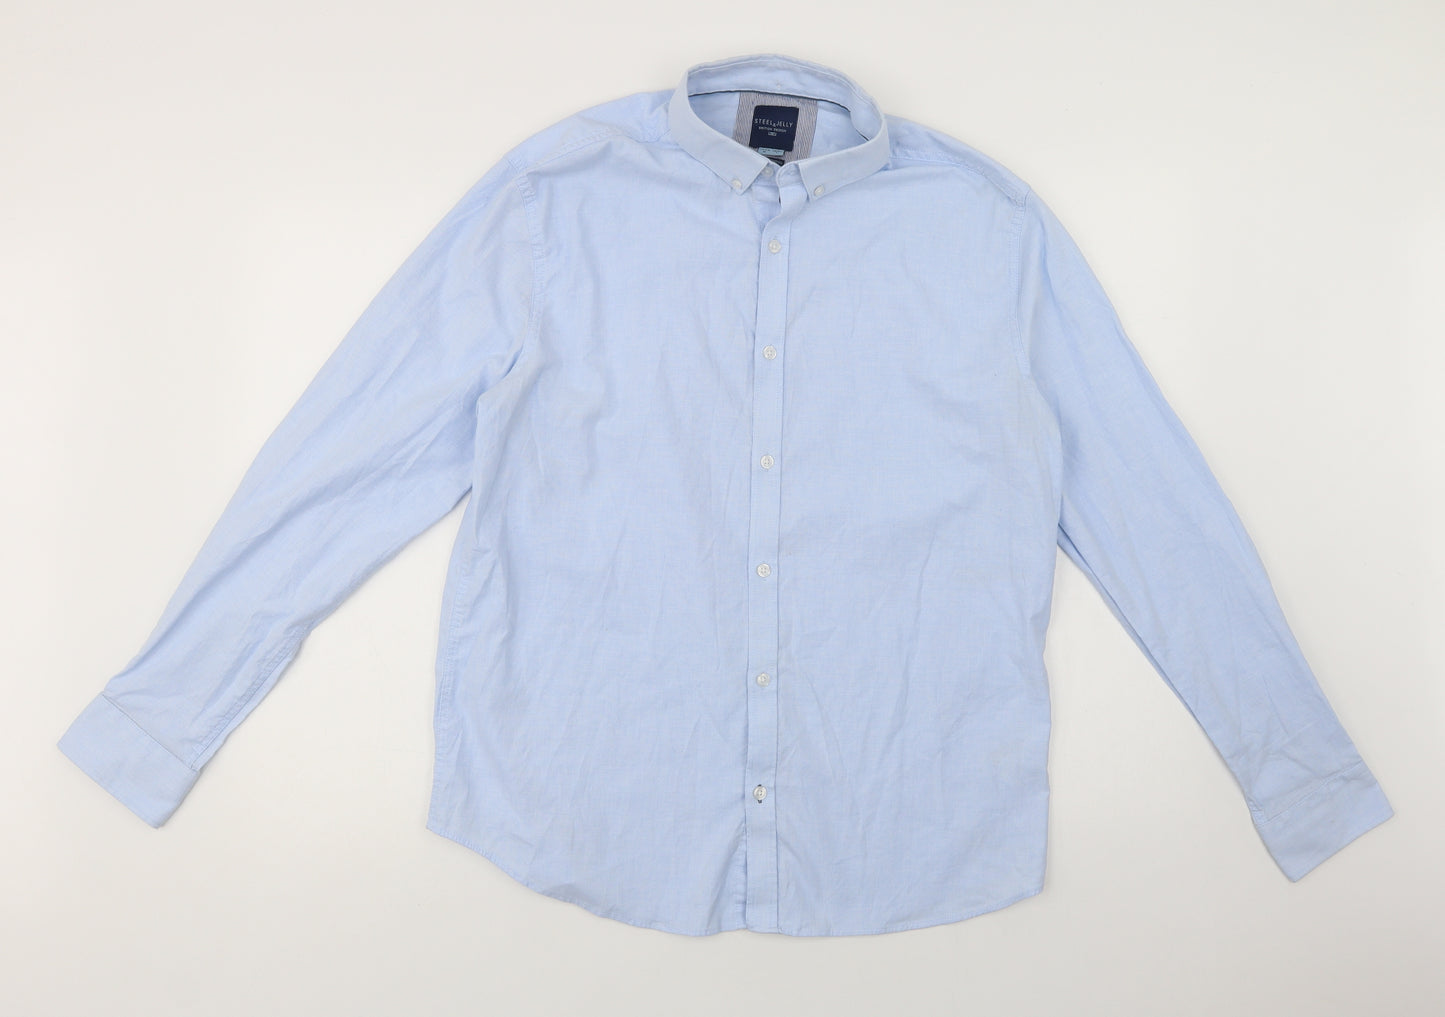 Steel & Jelly Mens Blue  Cotton  Button-Up Size M Collared Button